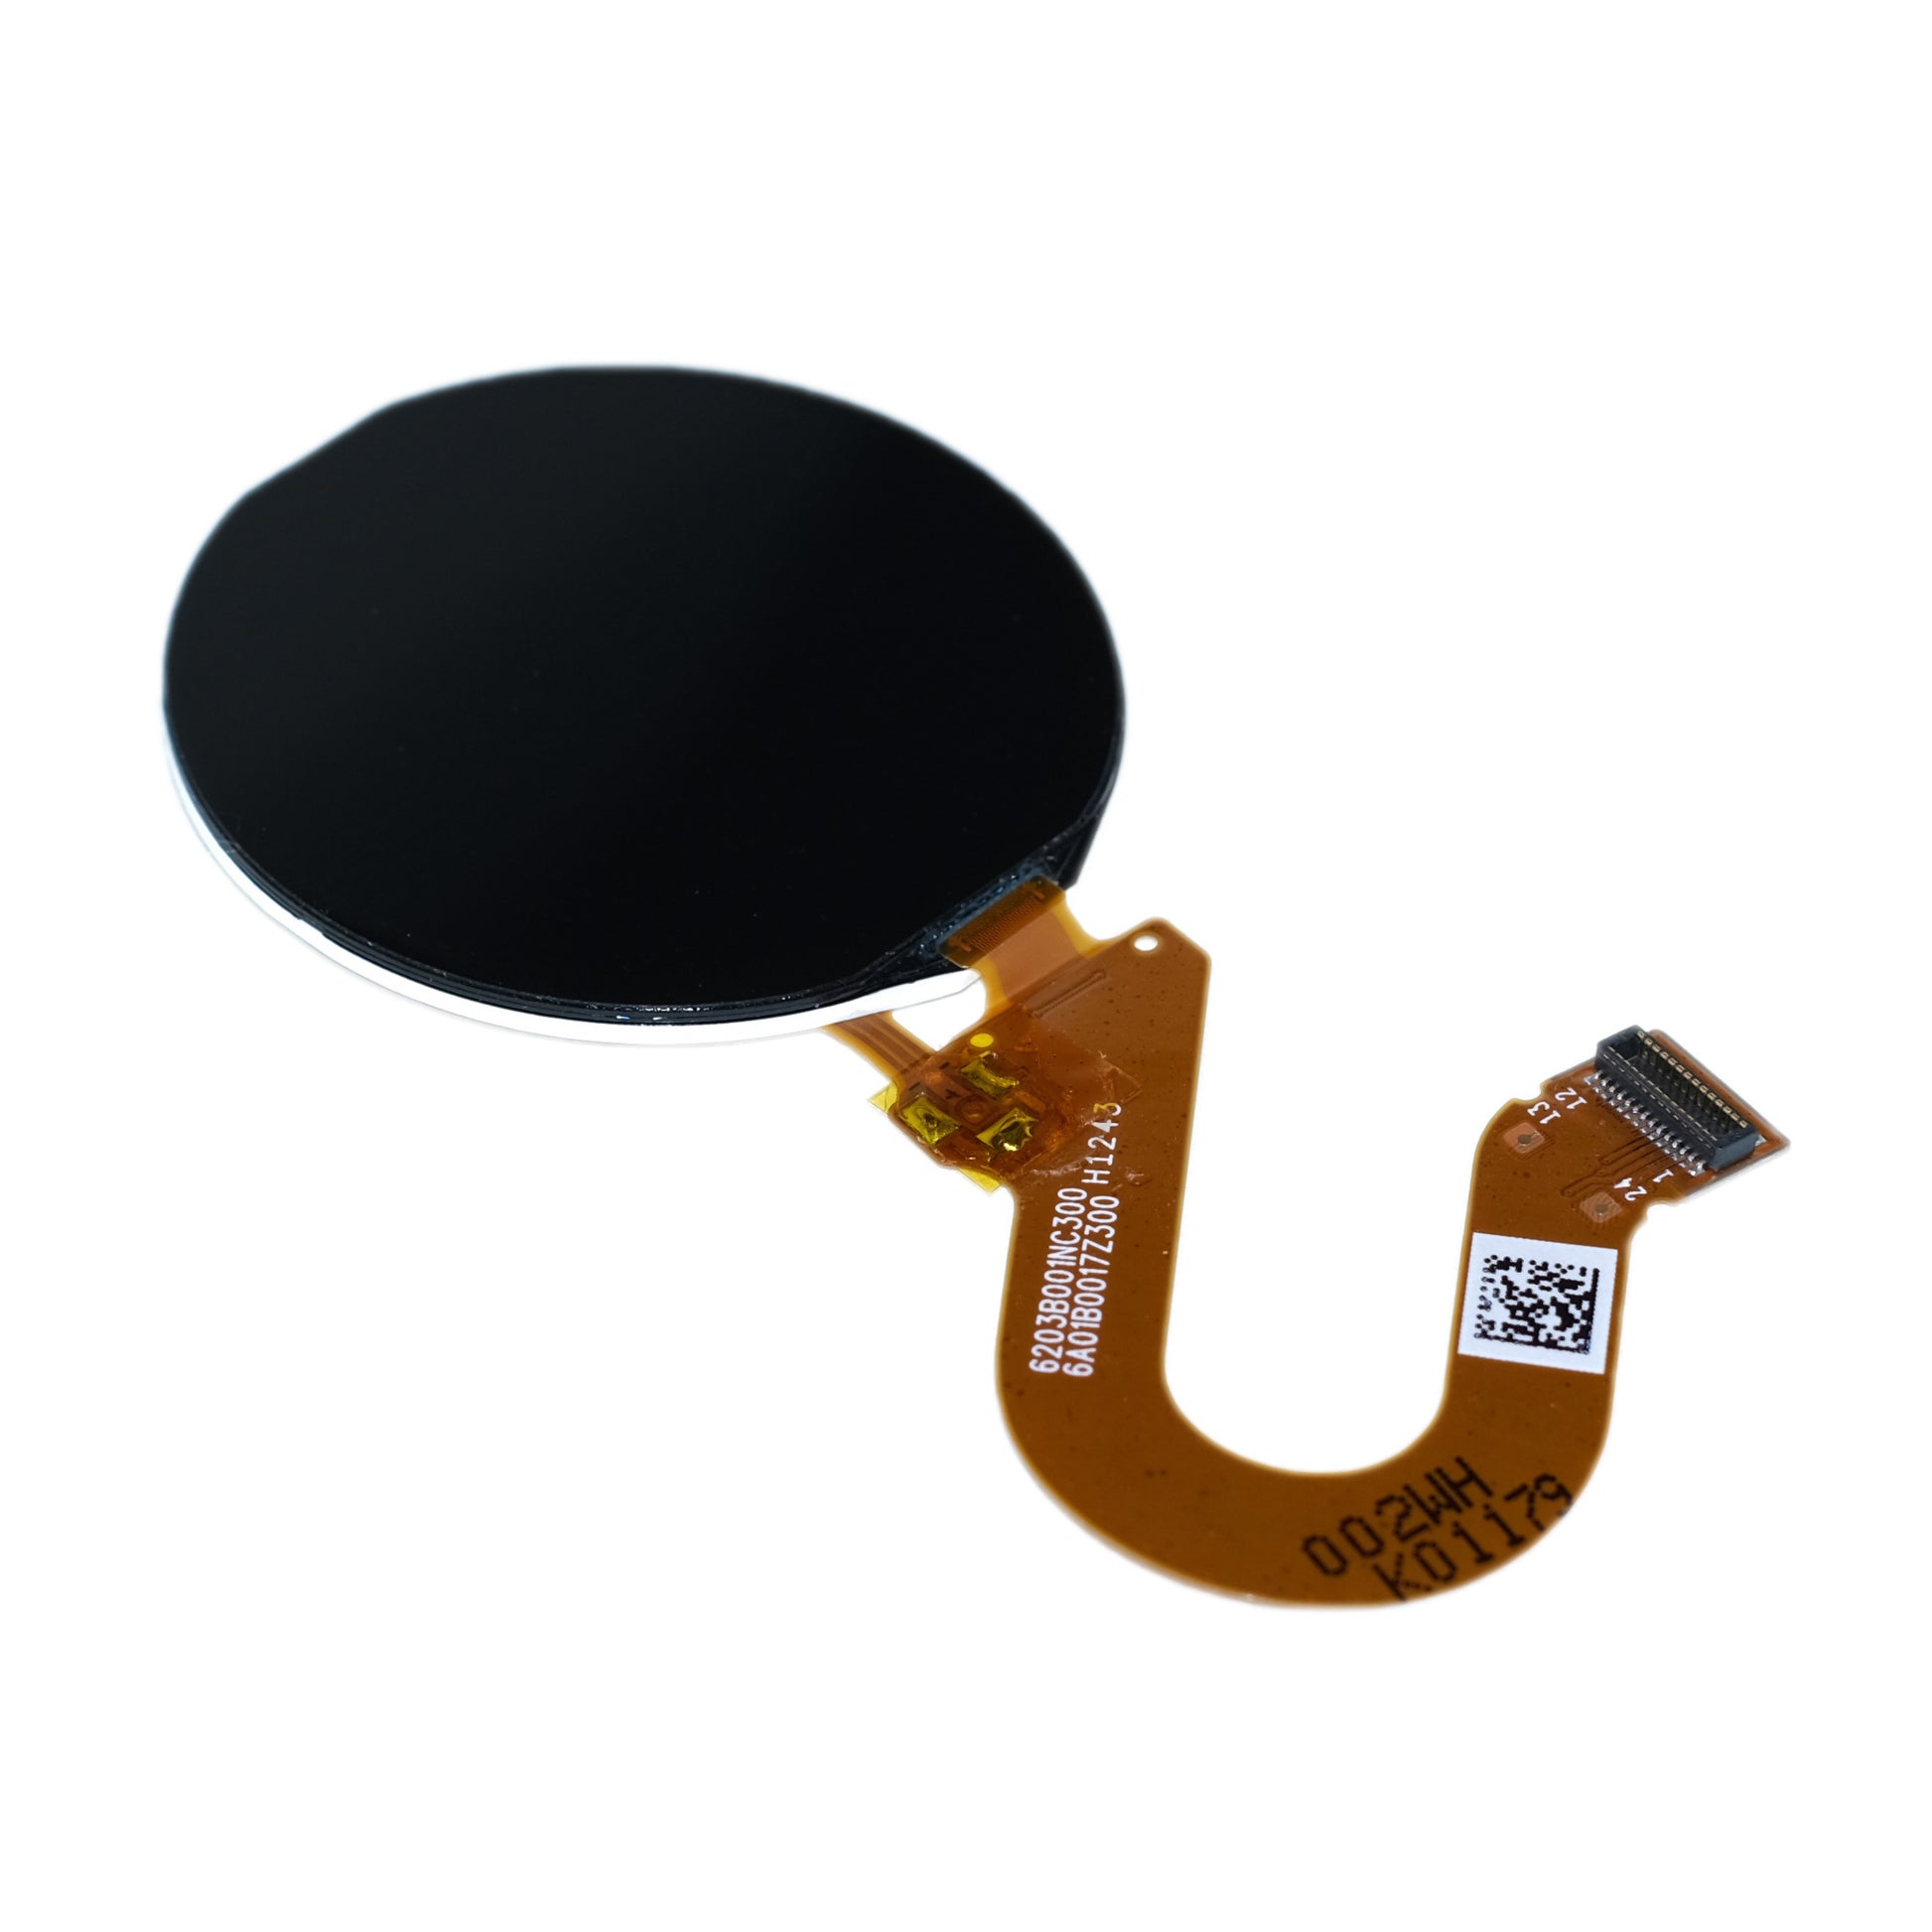 Side of 1.19-inch Round TFT Display Panel with 240x240 resolution